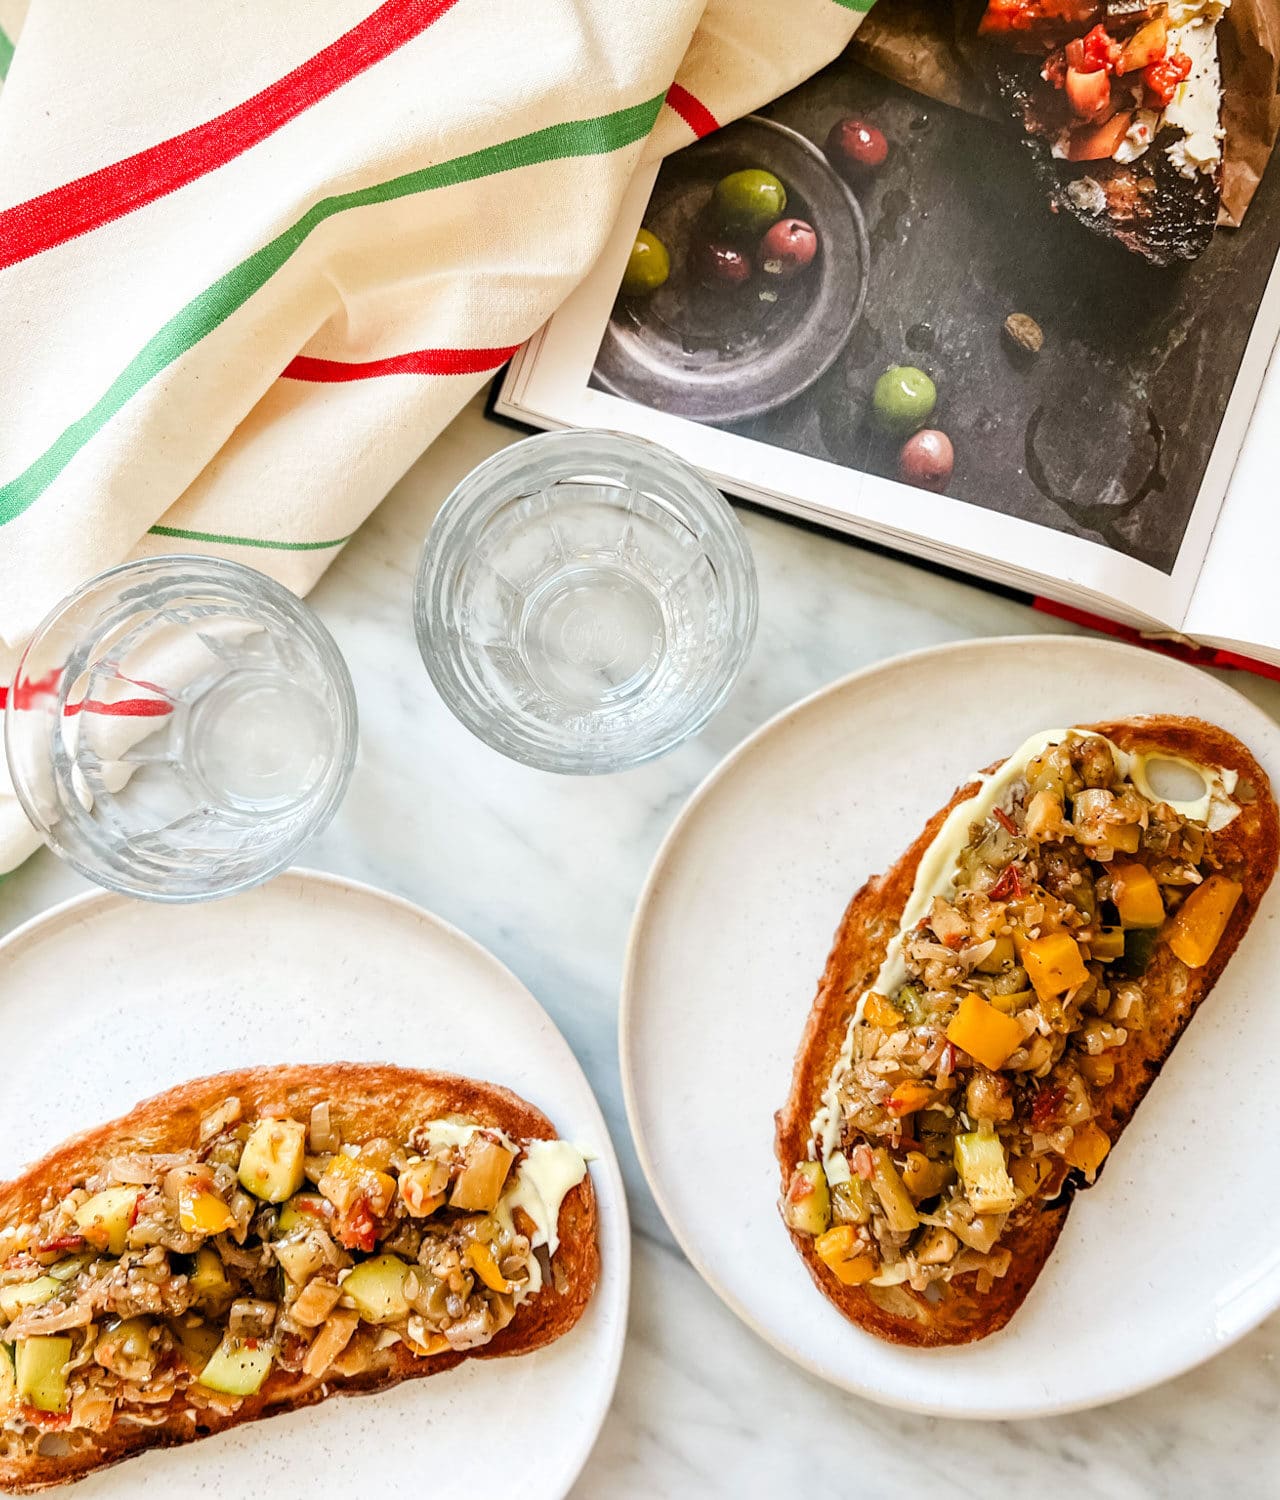 Easy Grilled Bread and Ratatouille Tartine Recipe from Buvette